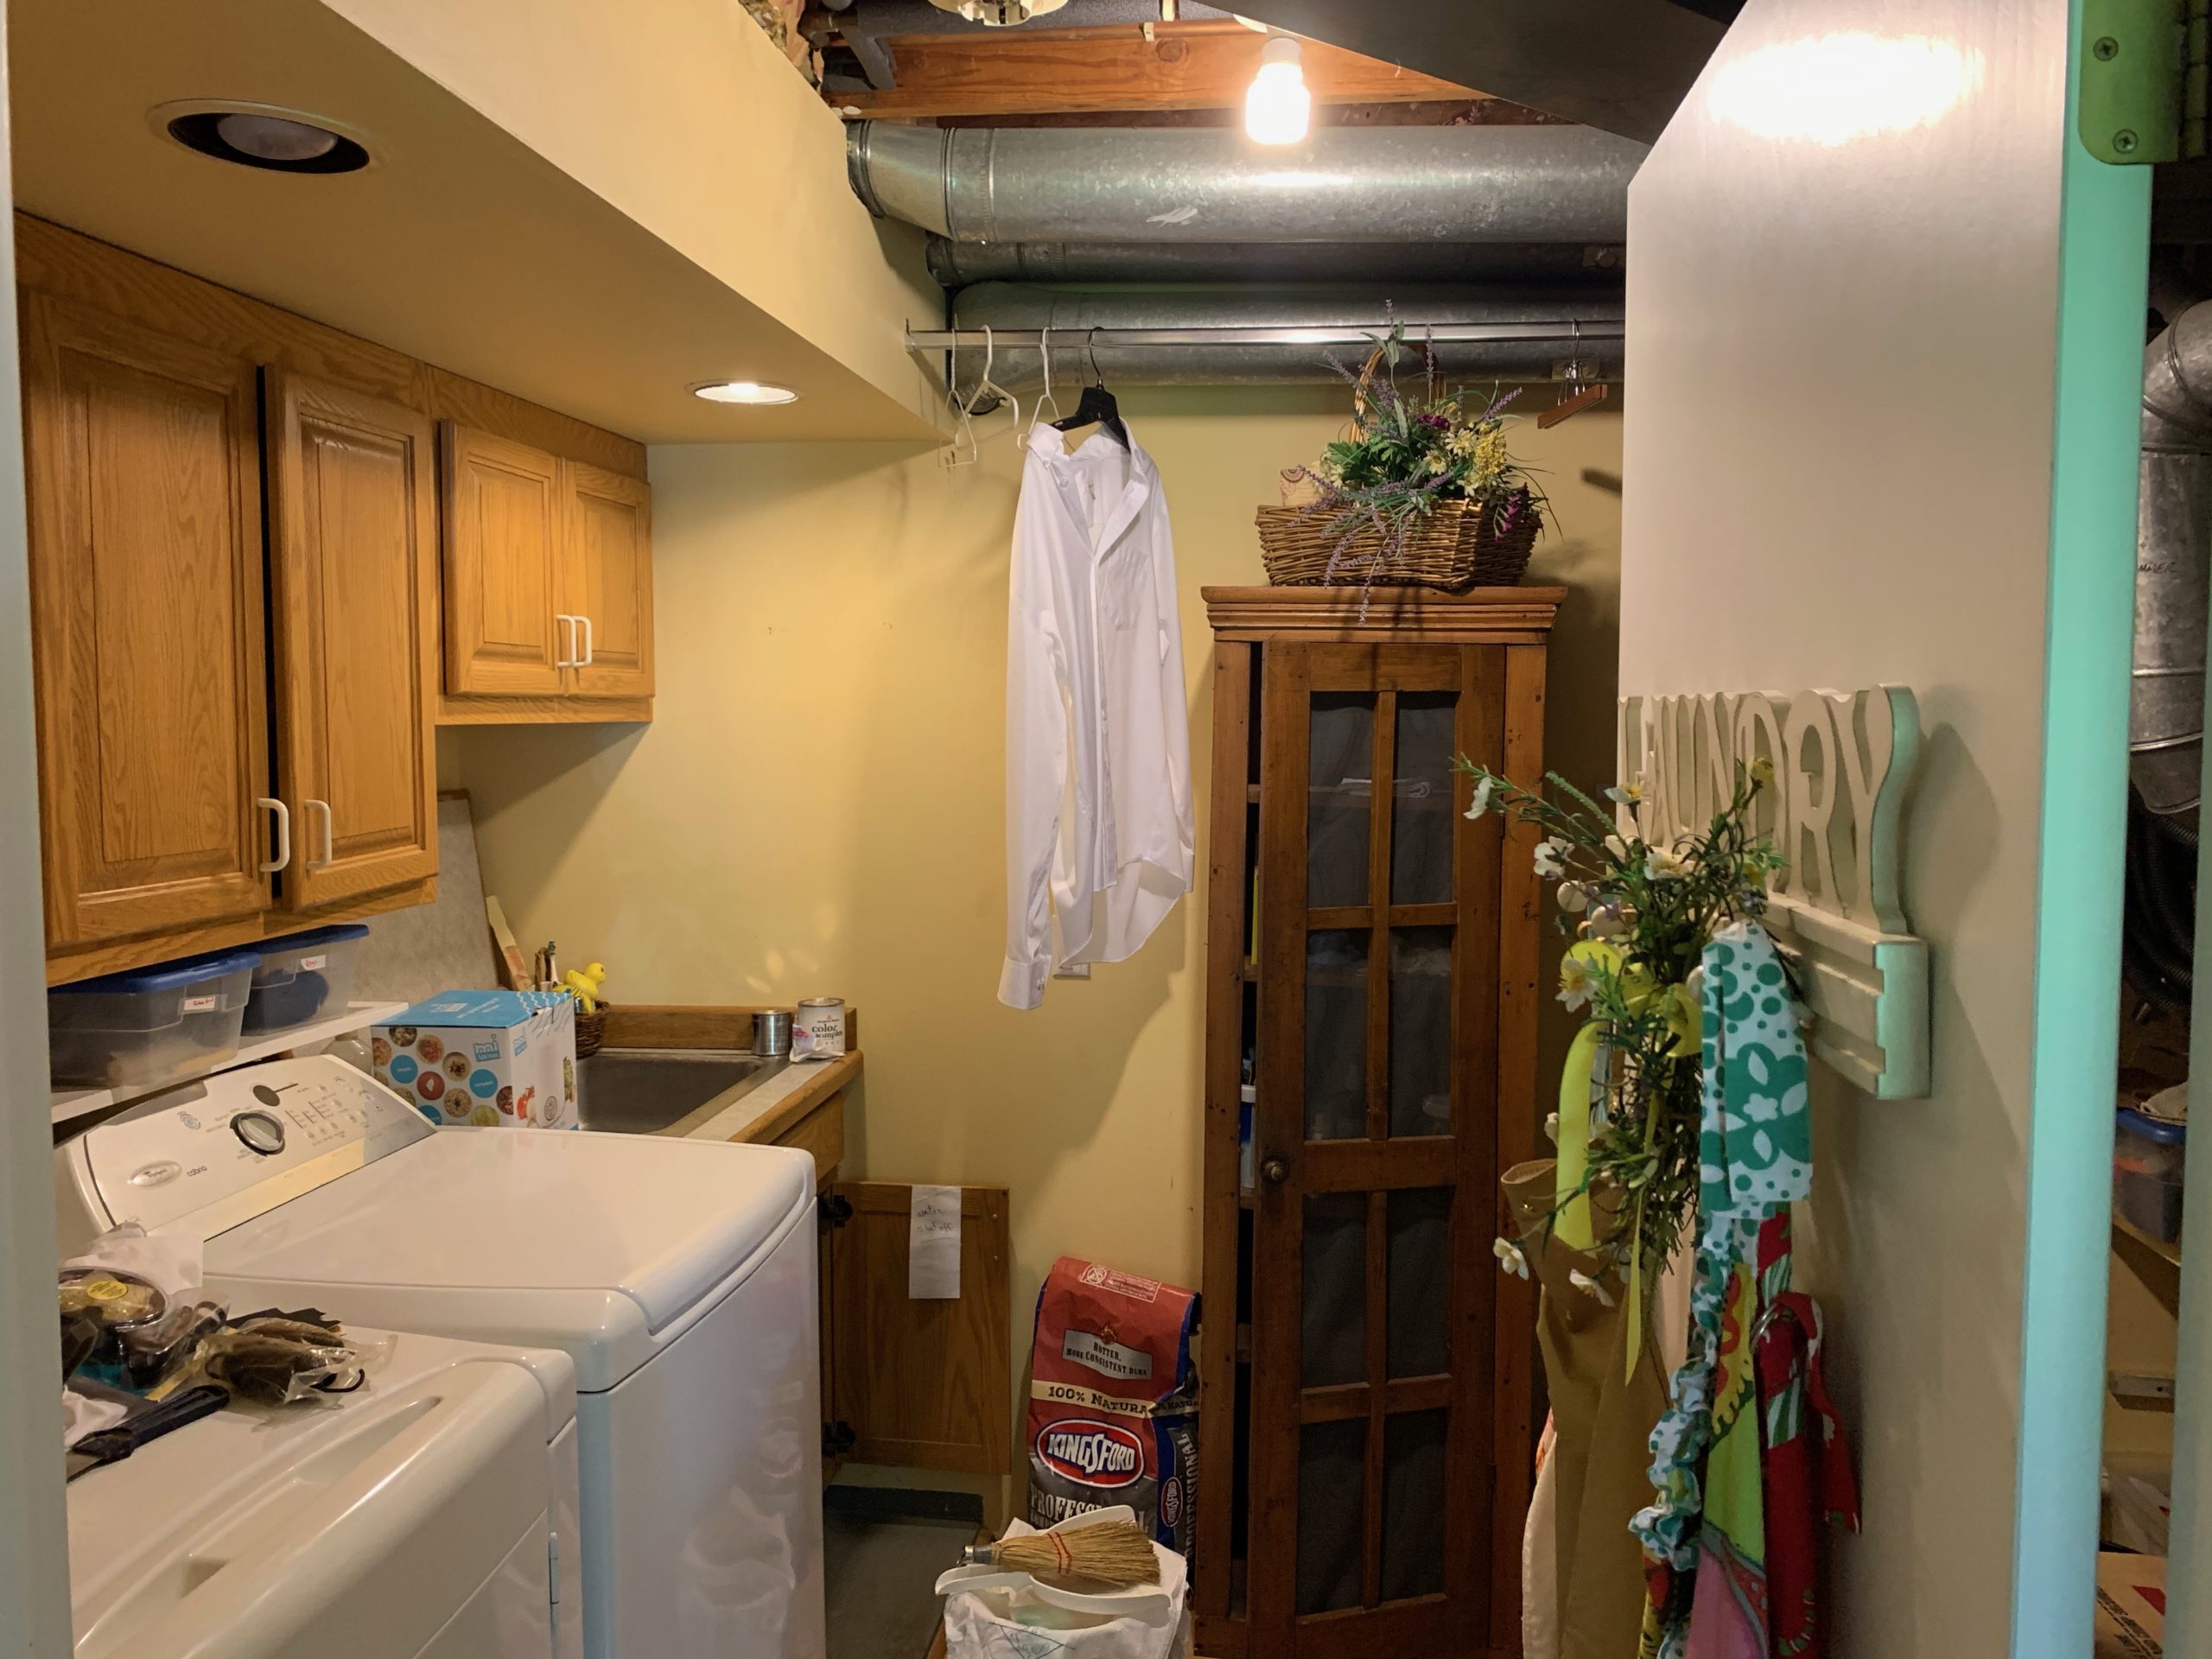 The Bradford, Laundry Room + Office Reveal | Before & After 8